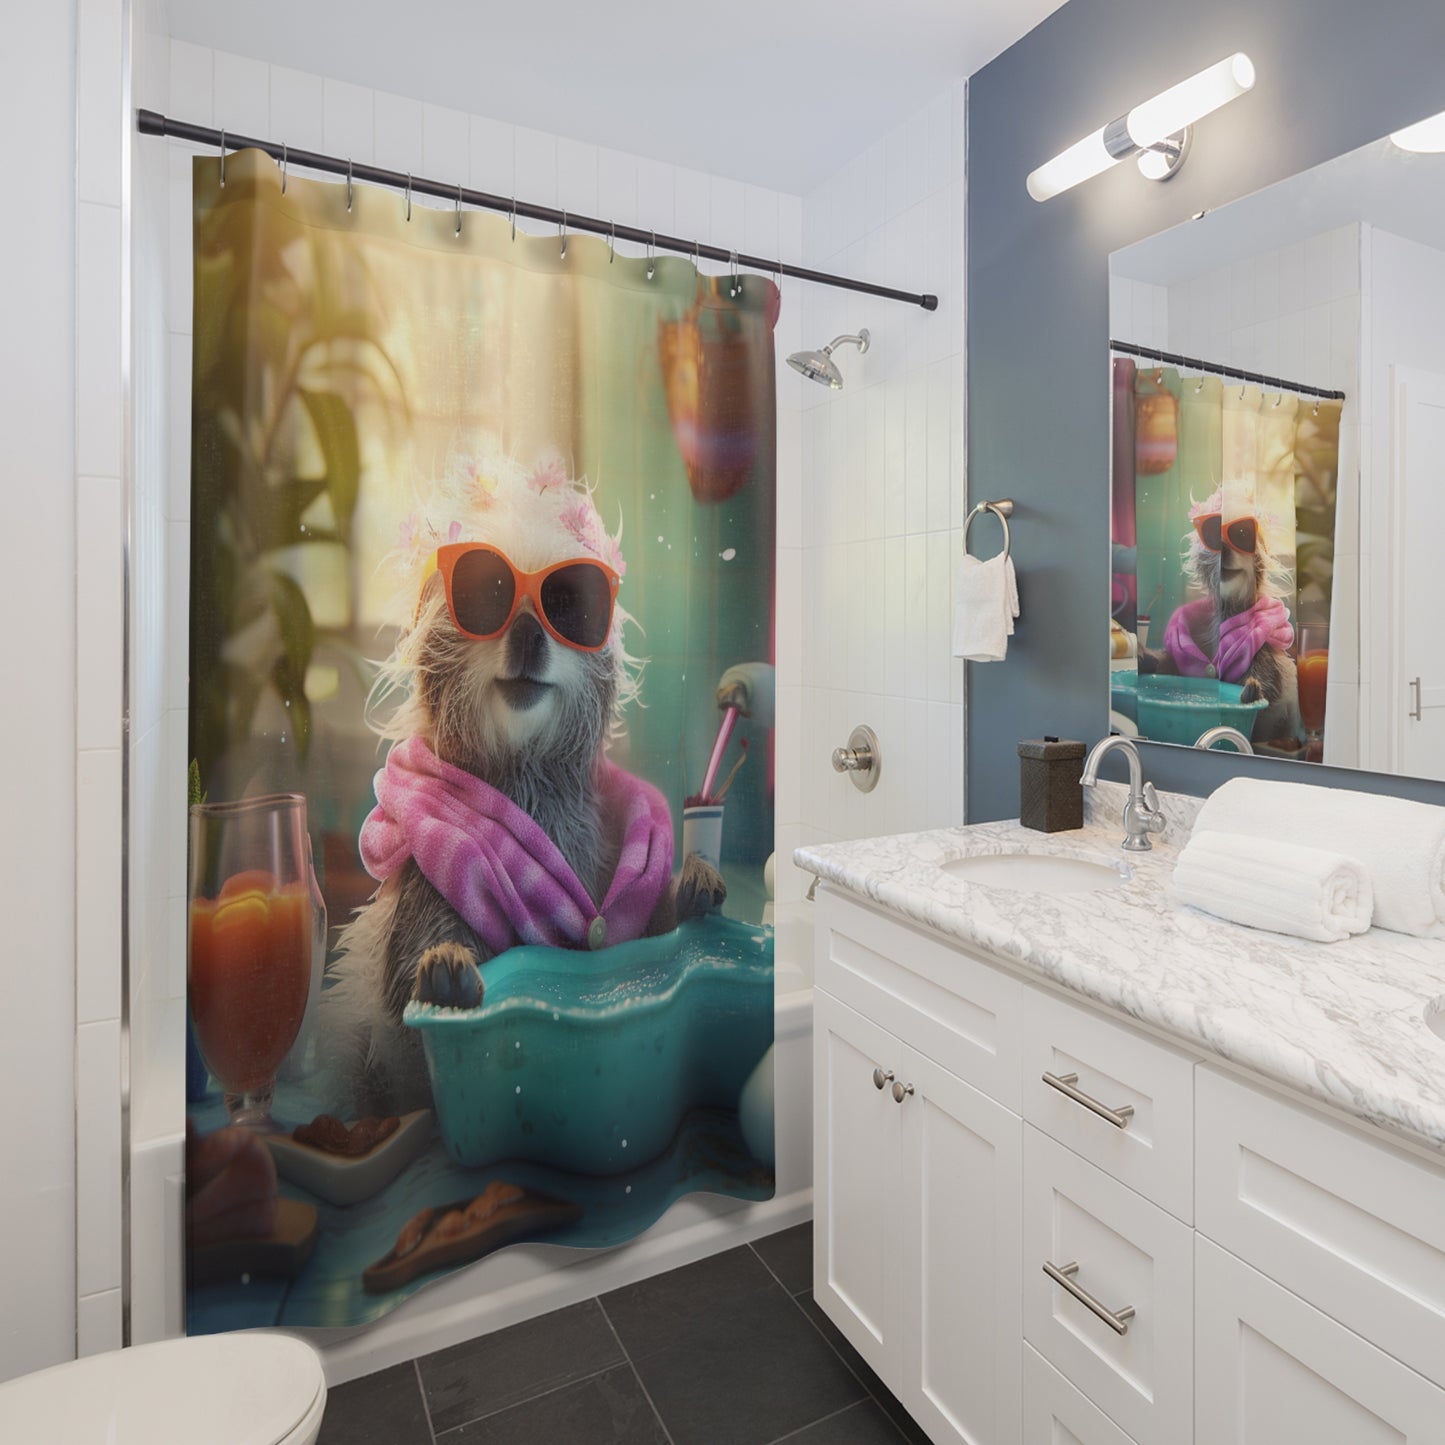 Whimsical and Adorable Shower Curtain - Furry Friend in the Tub